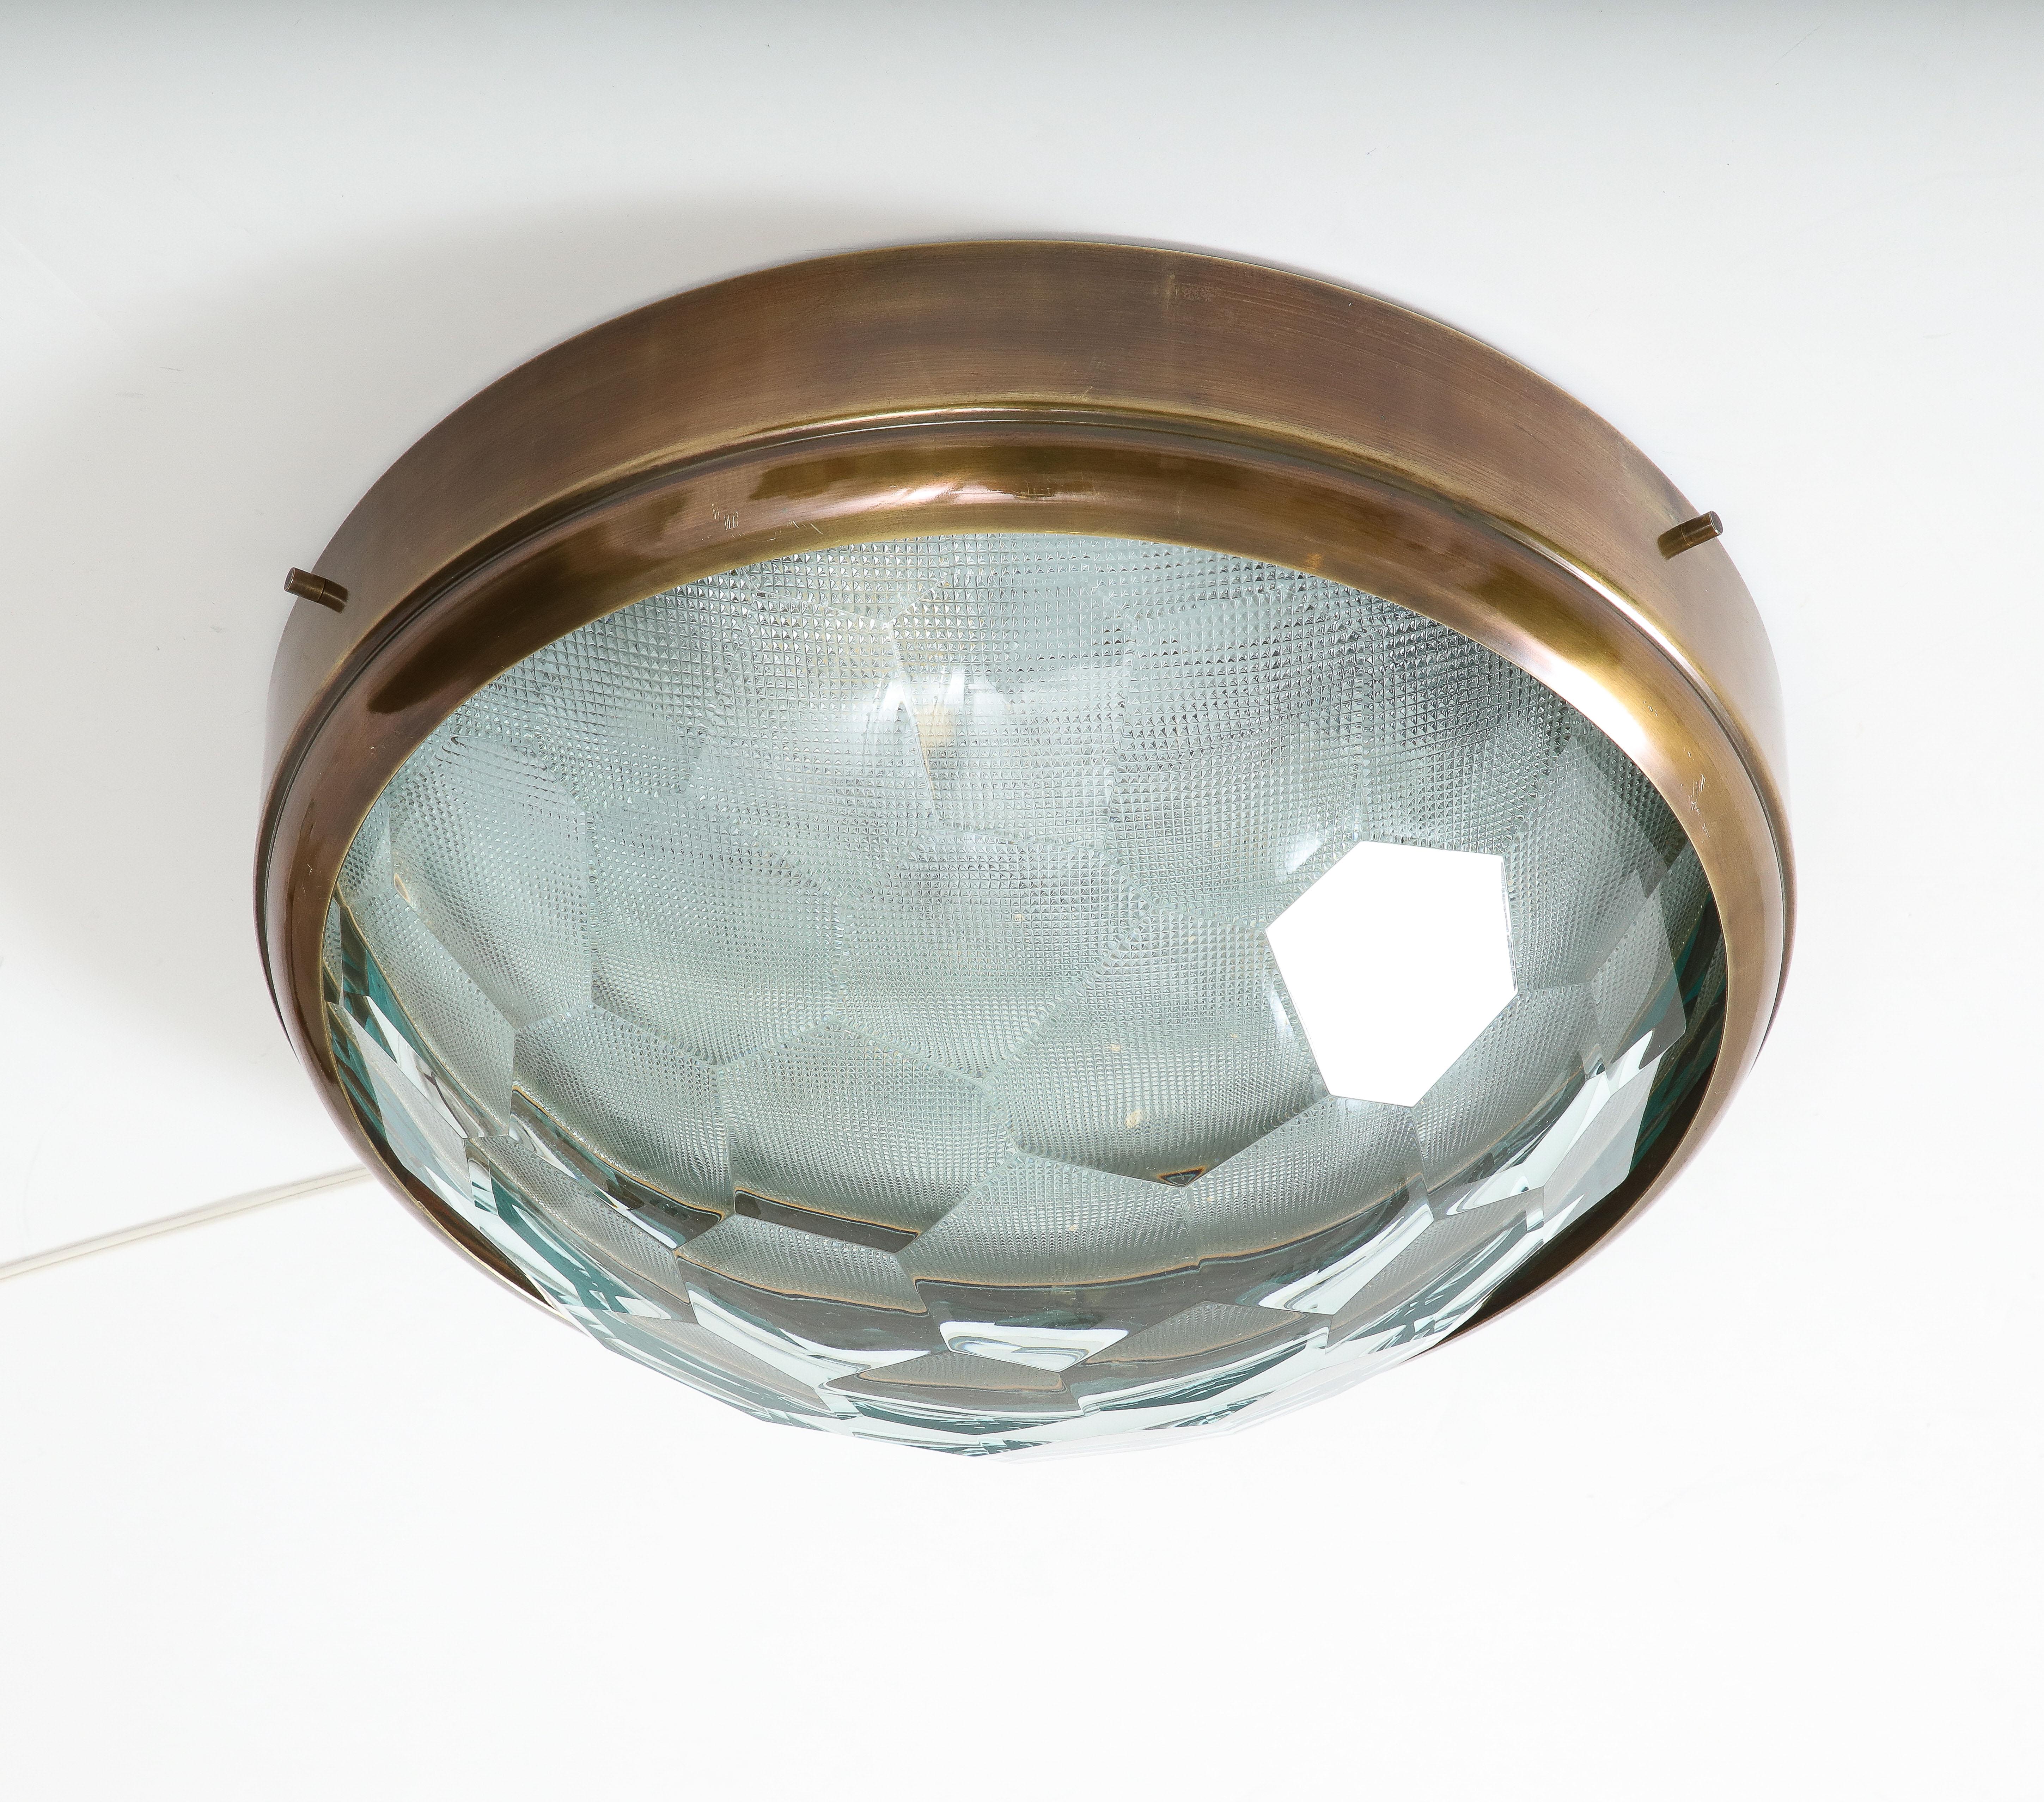 Large Faceted Glass Flush Mount Ceiling Light in Style of Fontana Arte, 1960s For Sale 2